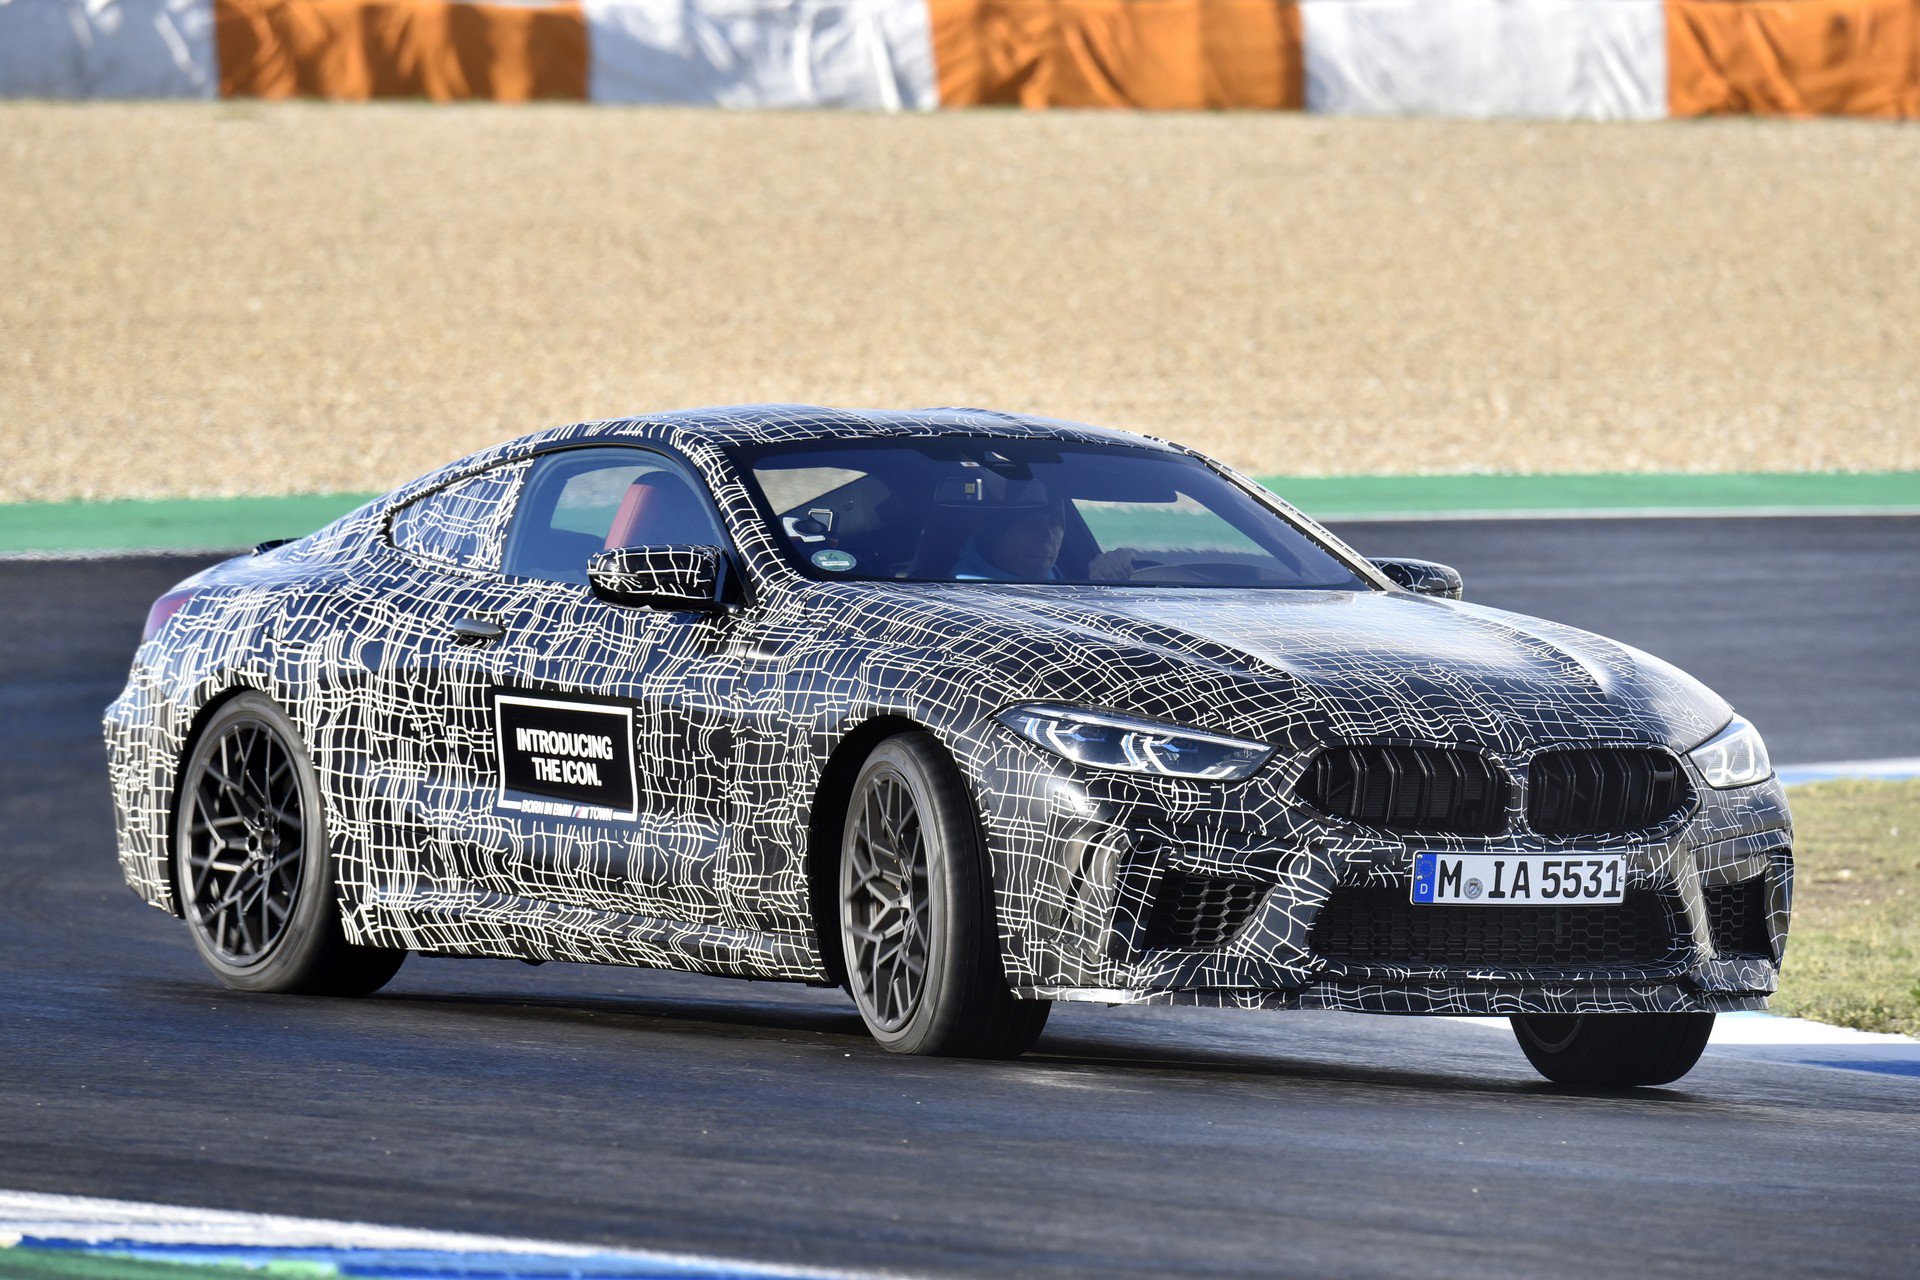 New 2019 BMW M8 Confirmed as the Most Powerful ‘M’ Model Ever Built, More Lightweight than 8-Series Range